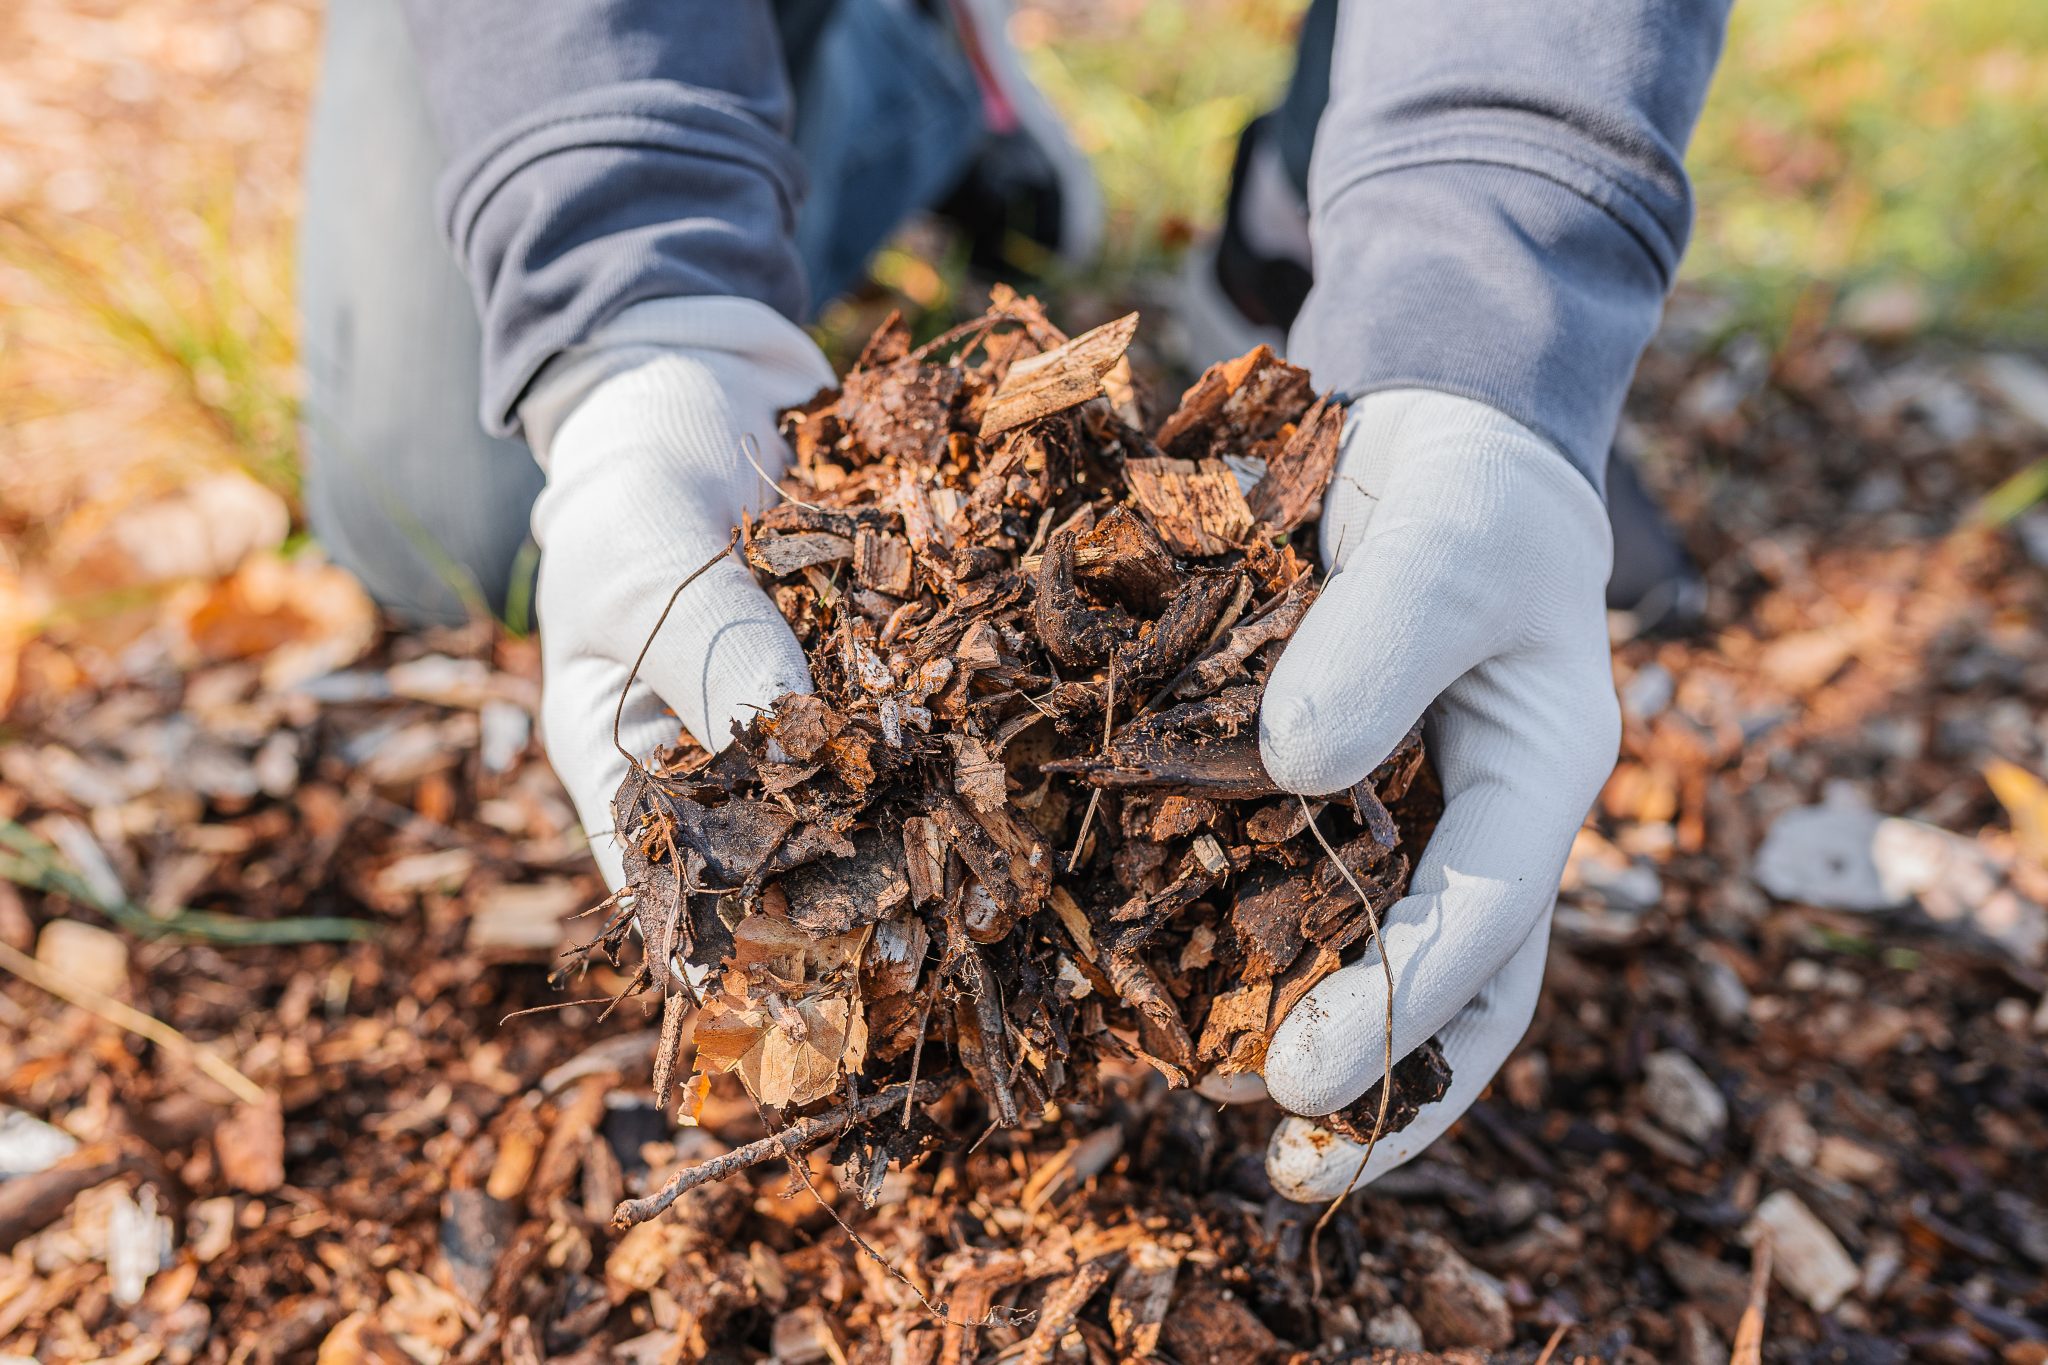 Composting and Landscaping at Home